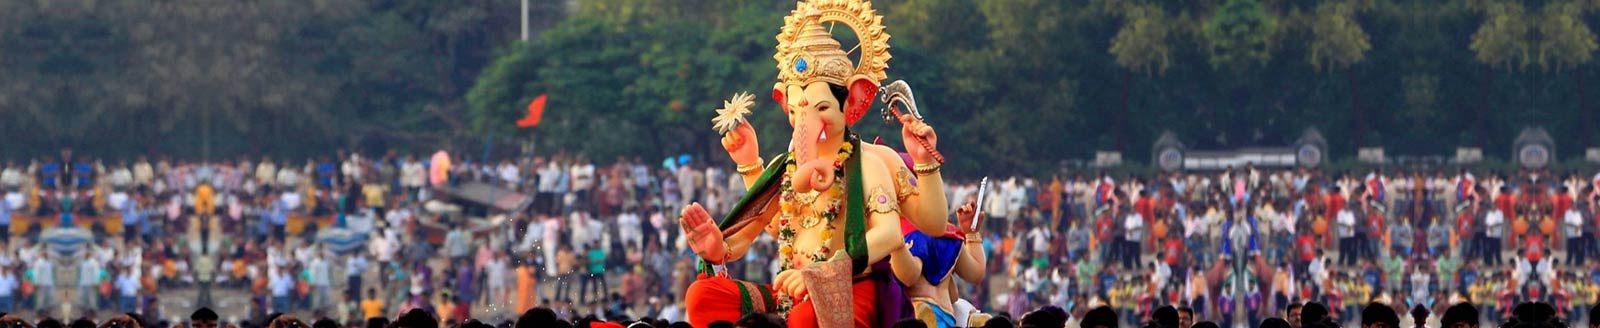 Ganesh Chaturthi Traditions and Customs